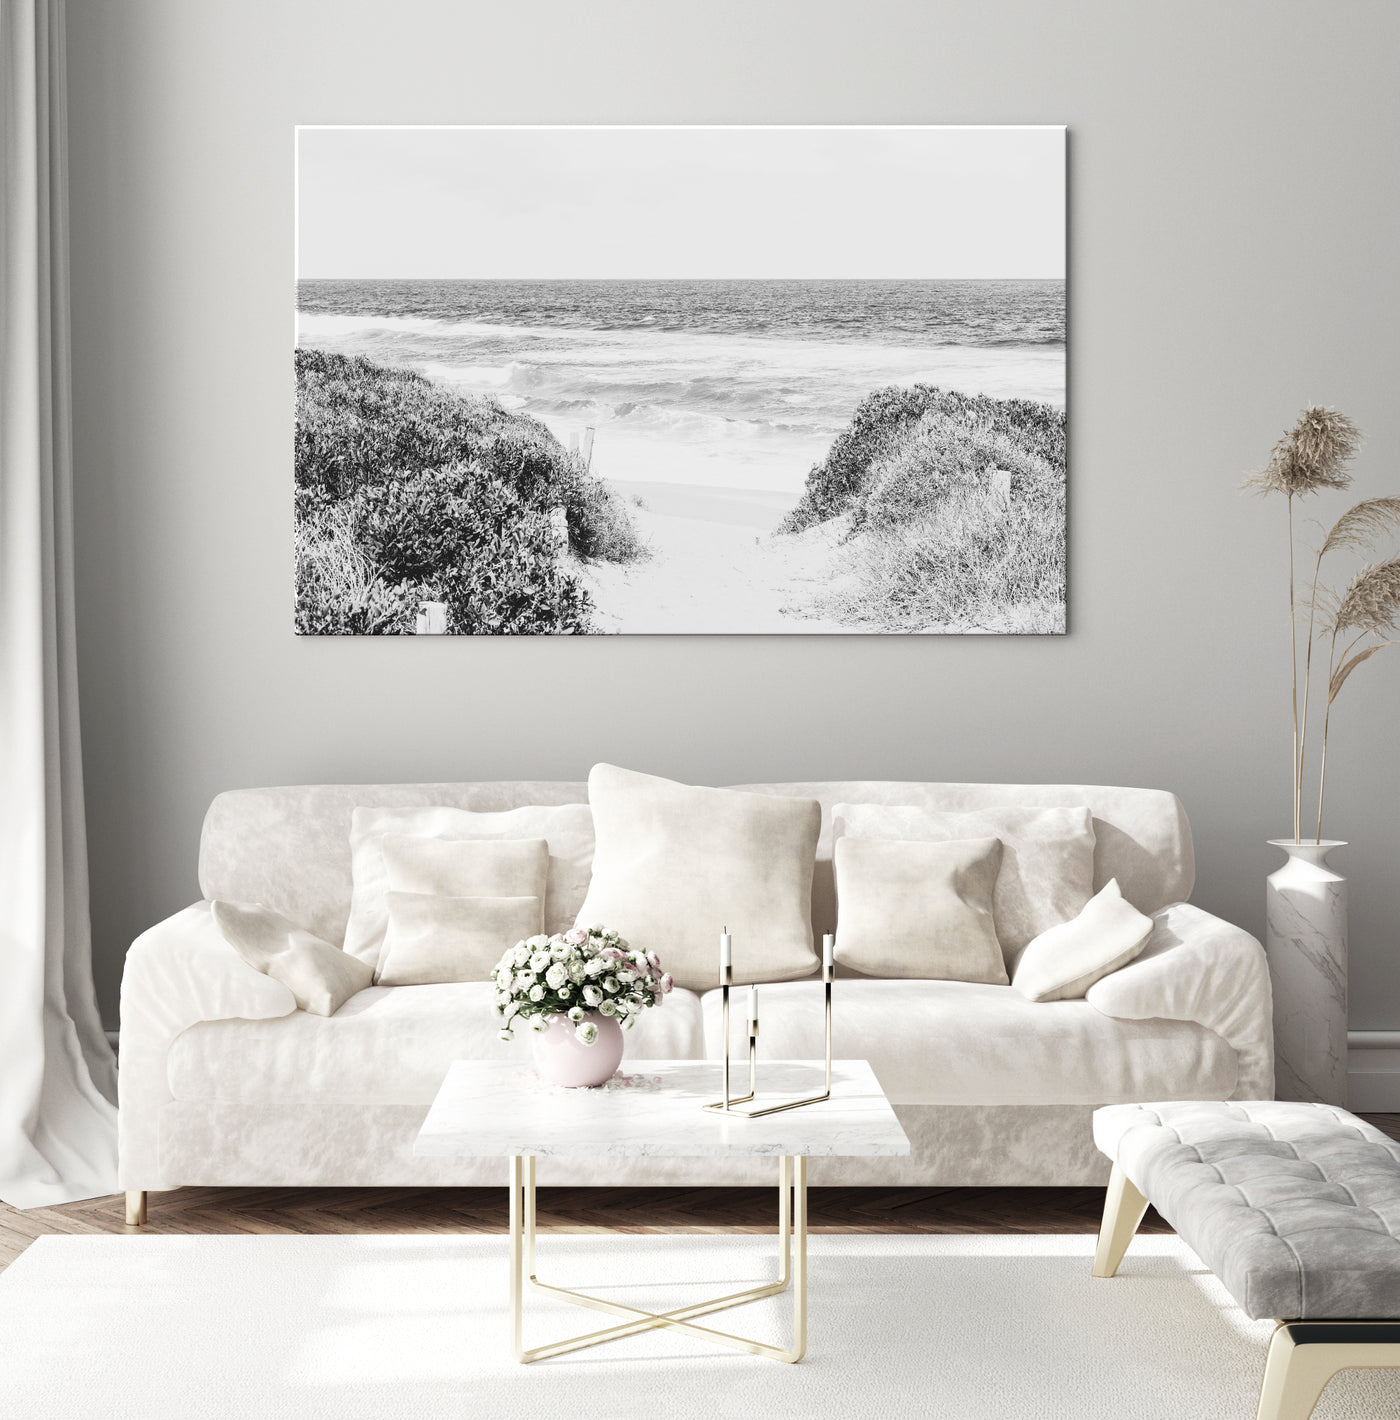 black and white beach wall art print, oversized canvas for living room over sofa | arrtopia